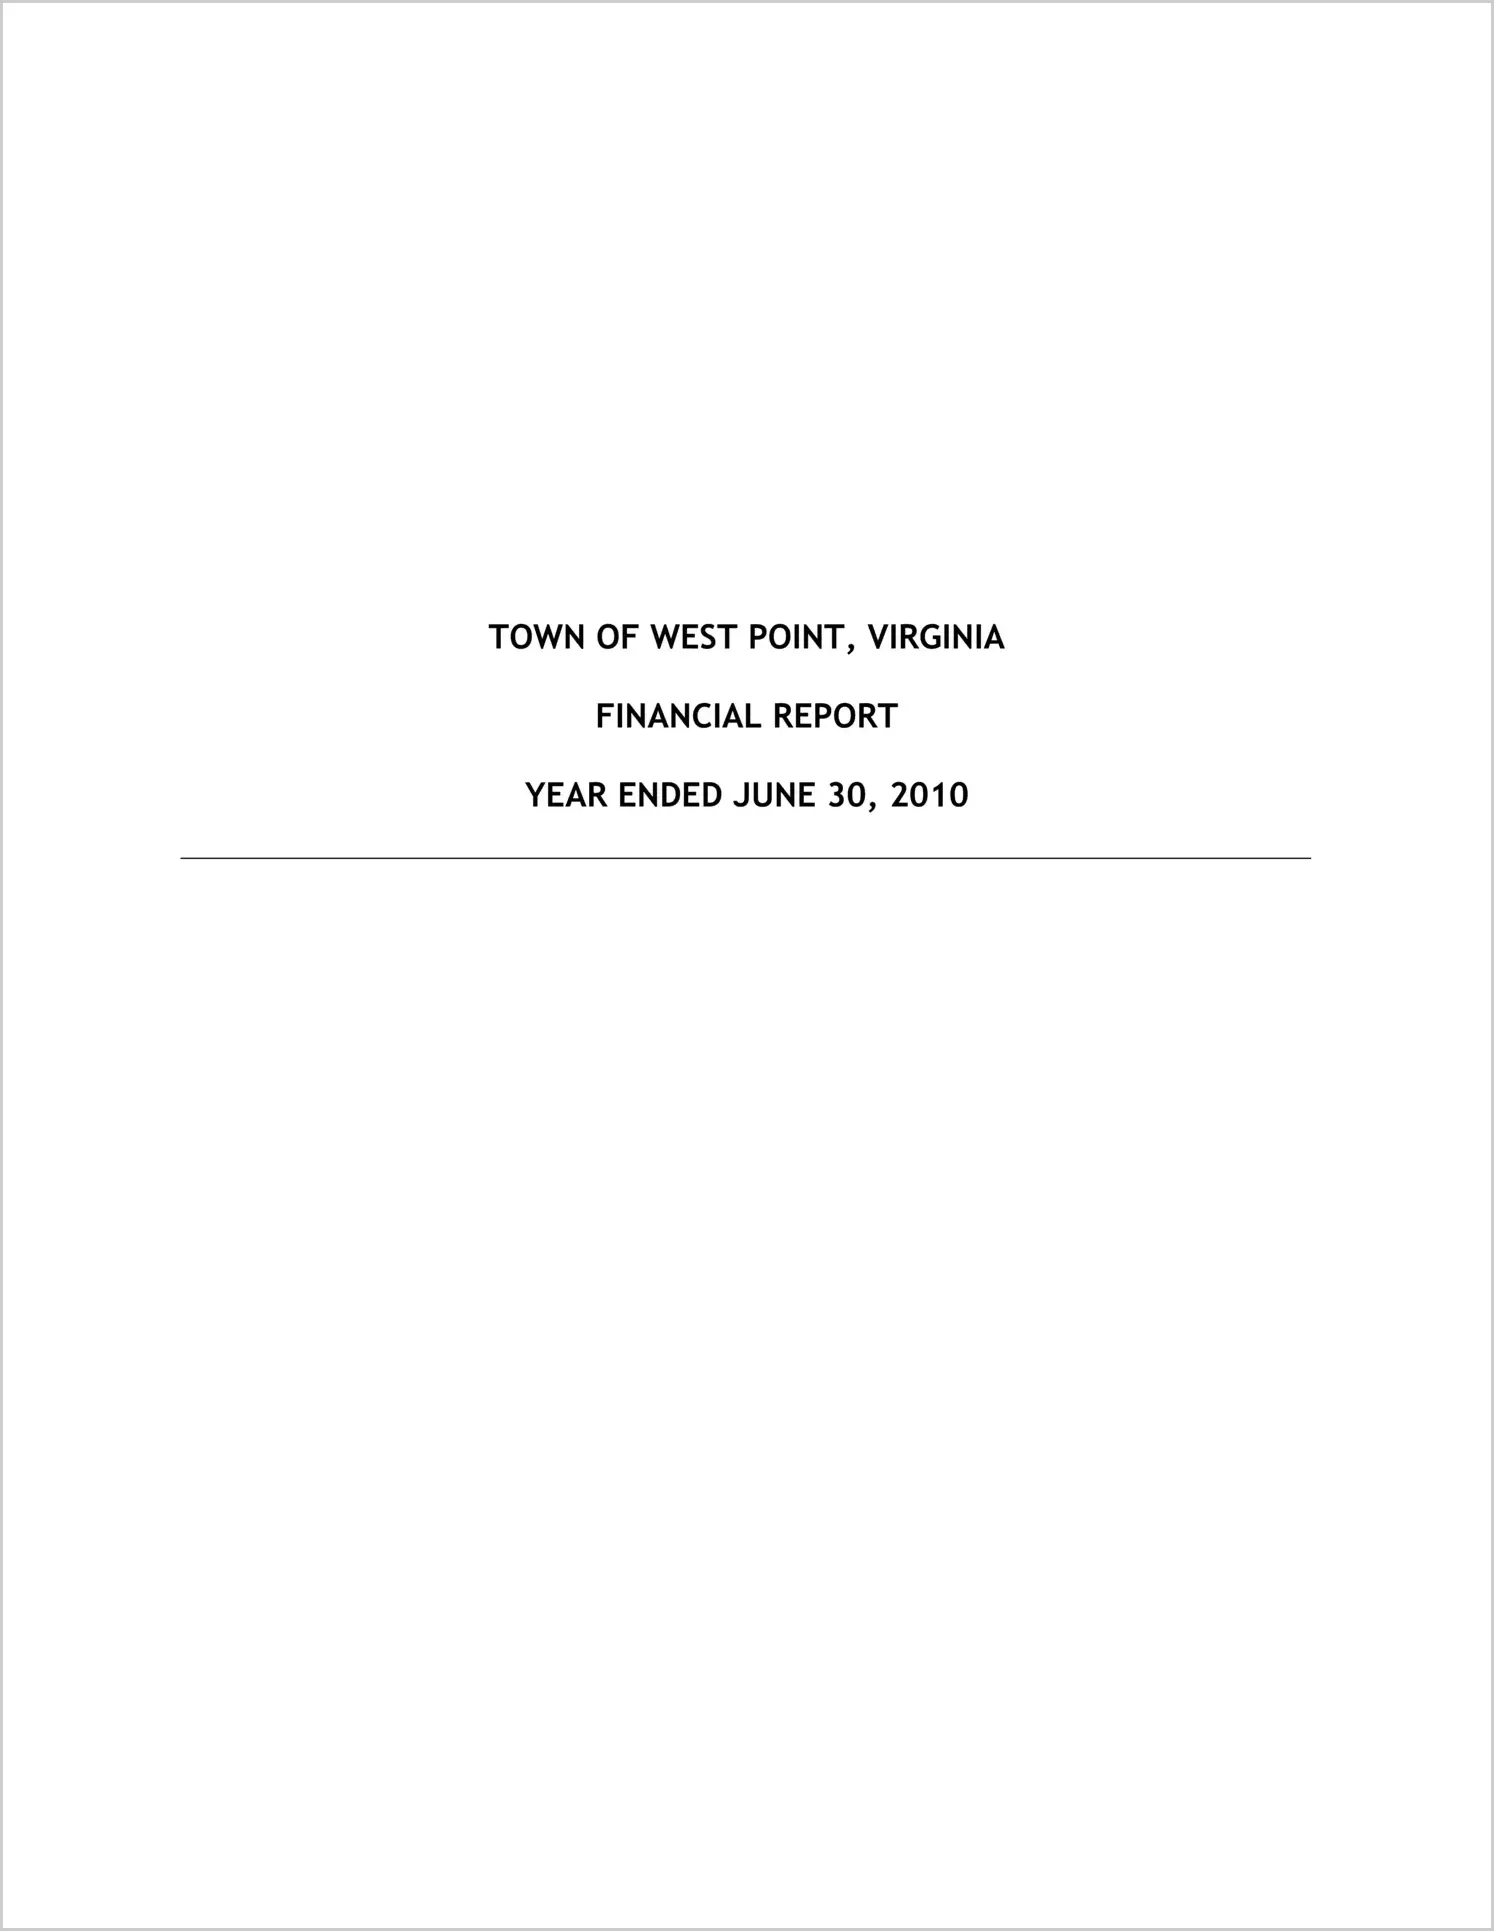 2010 Annual Financial Report for Town of West Point